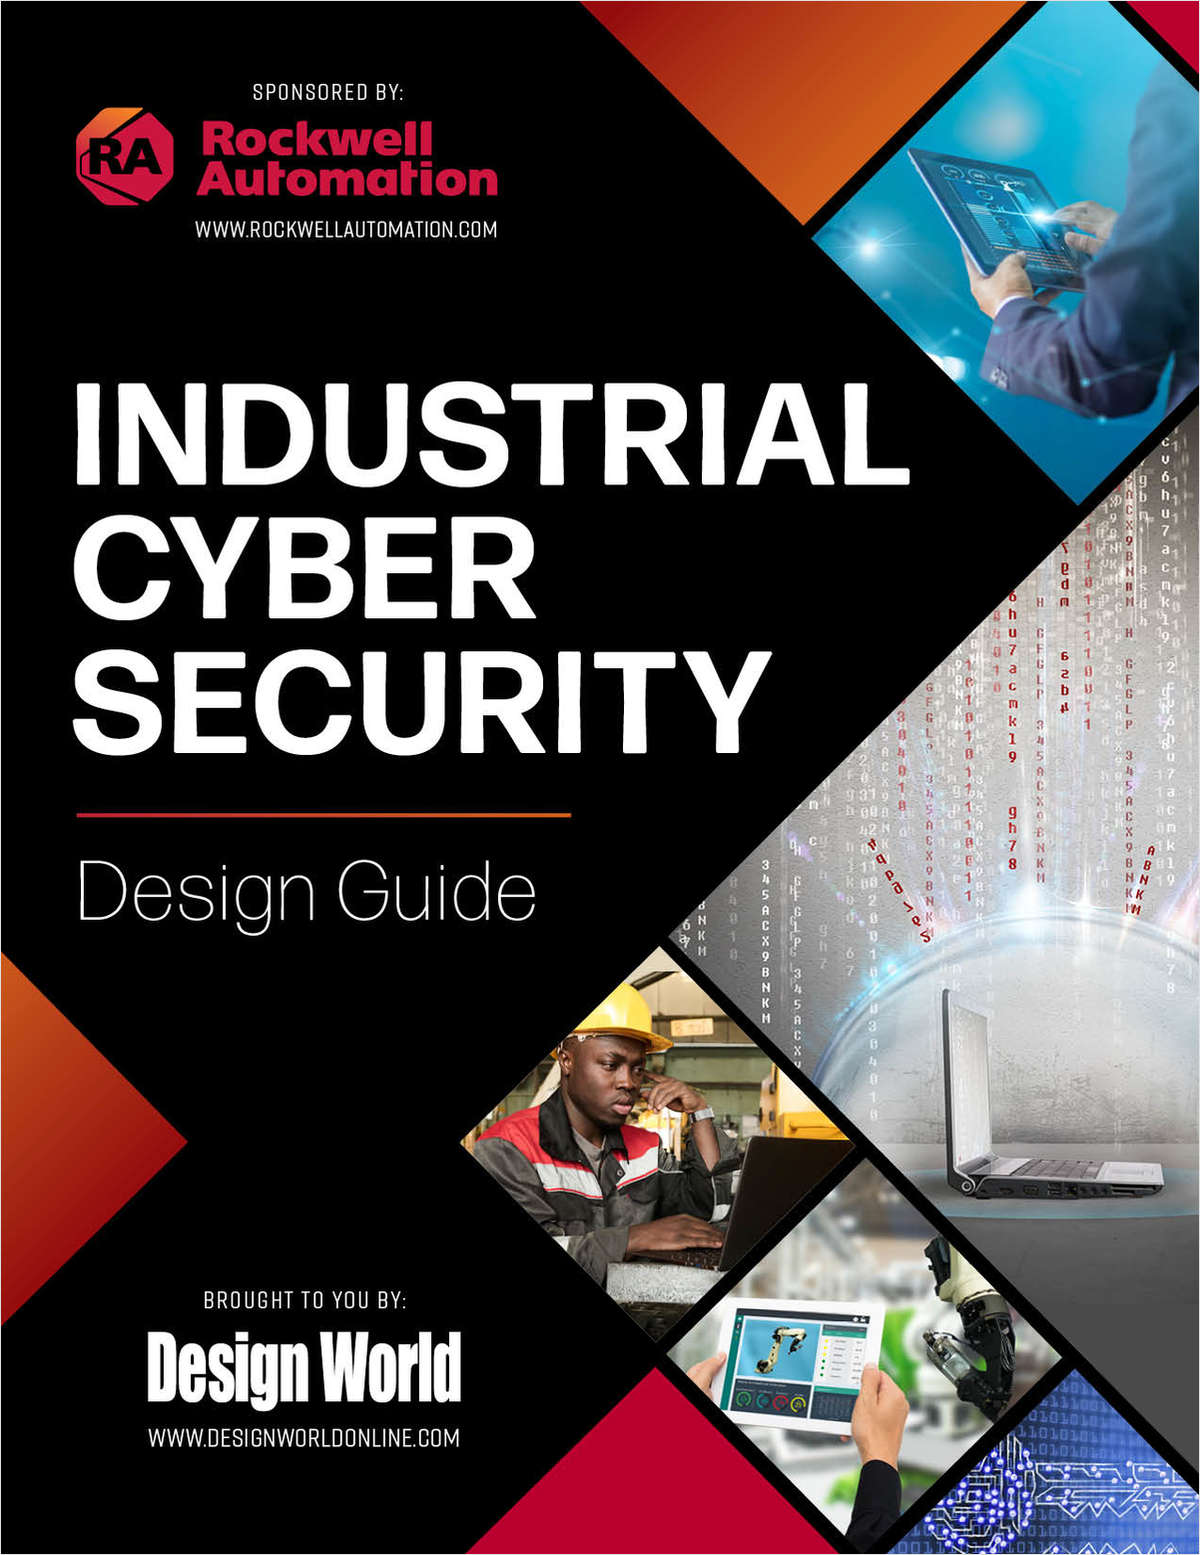 Industrial Cyber Security Design Guide